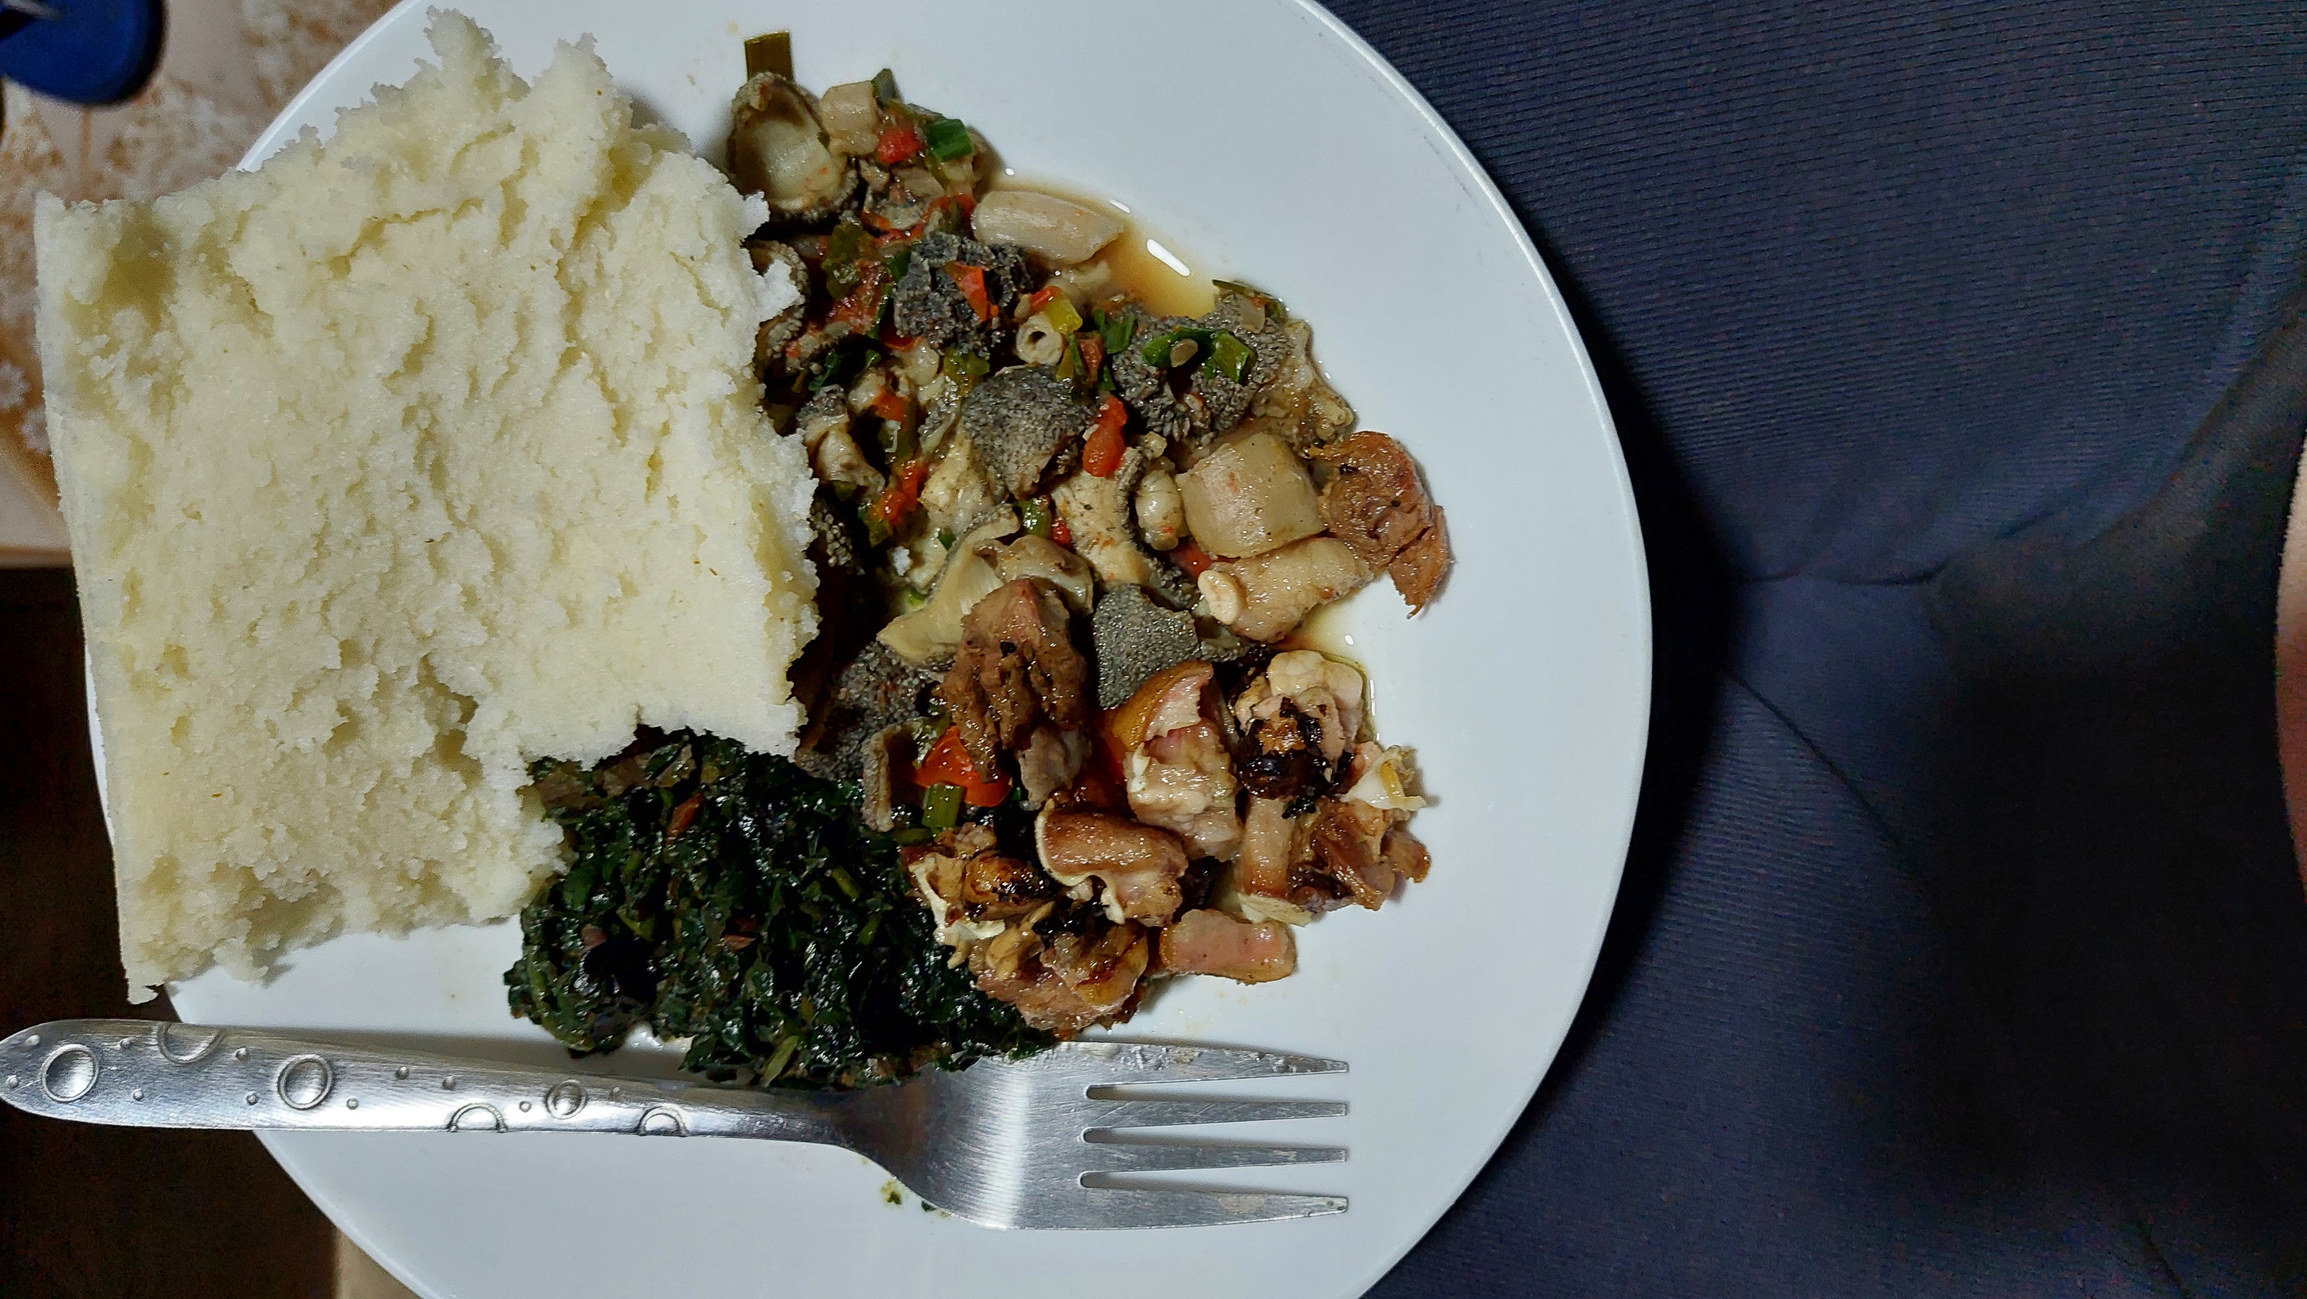 Ugali and other Kenyan foods on a plate